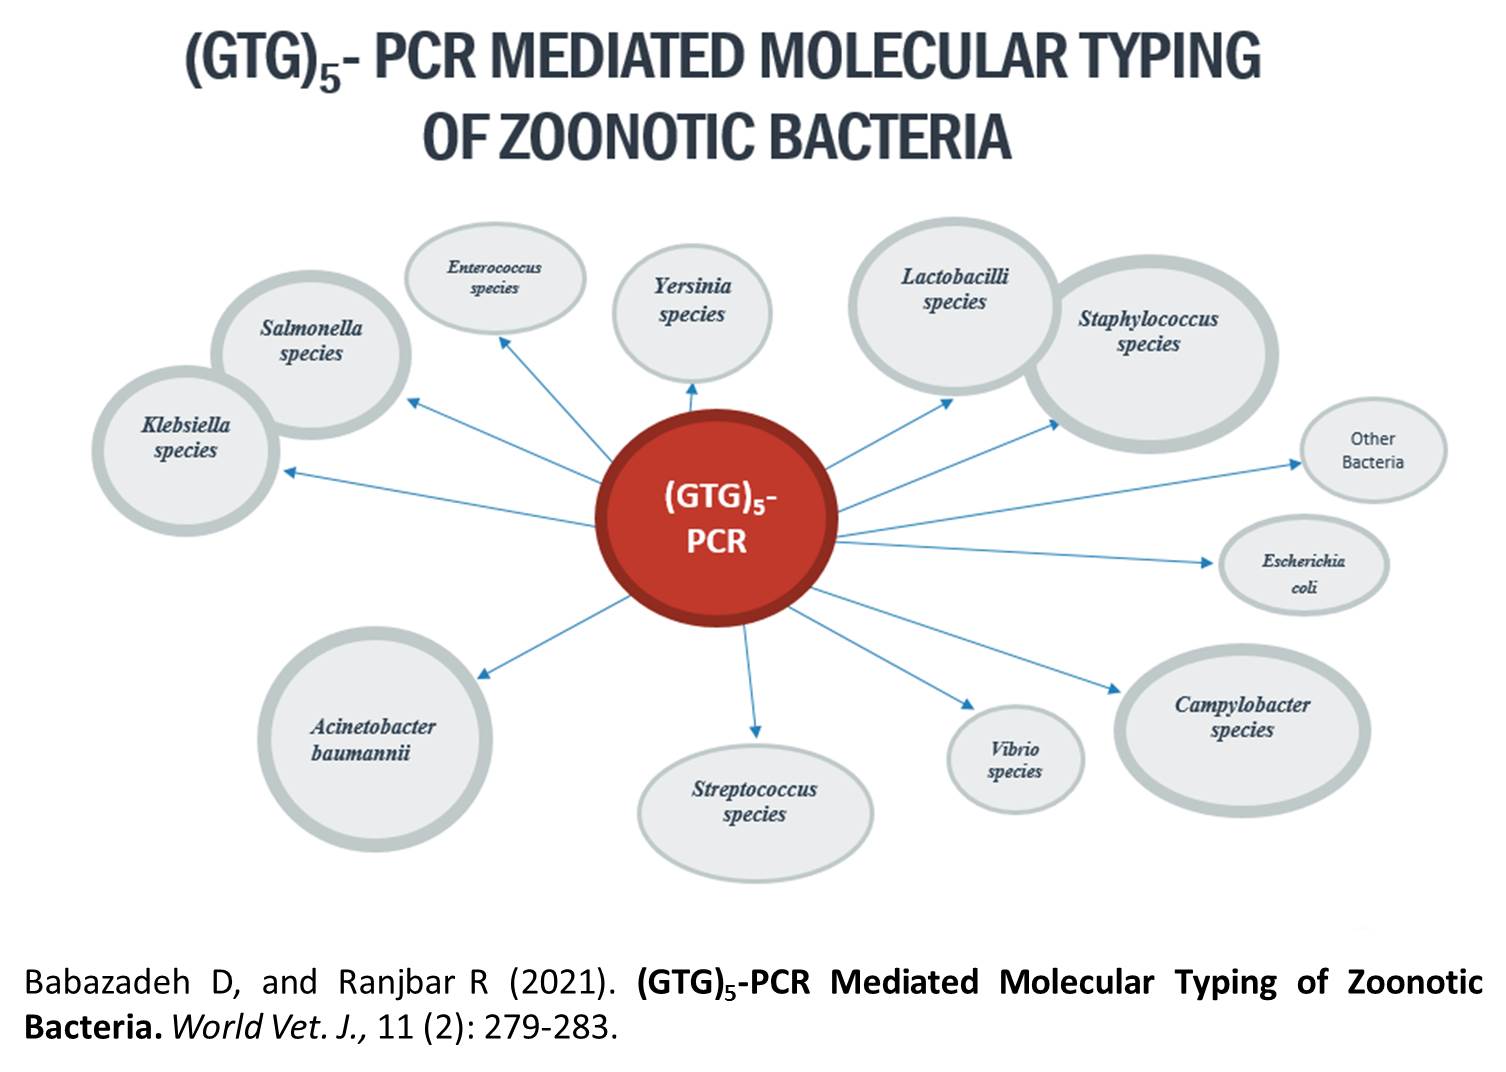 1400-31-GTG5-PCR_Mediated_Molecular_Typing_of_Zoonotic_Bacteria